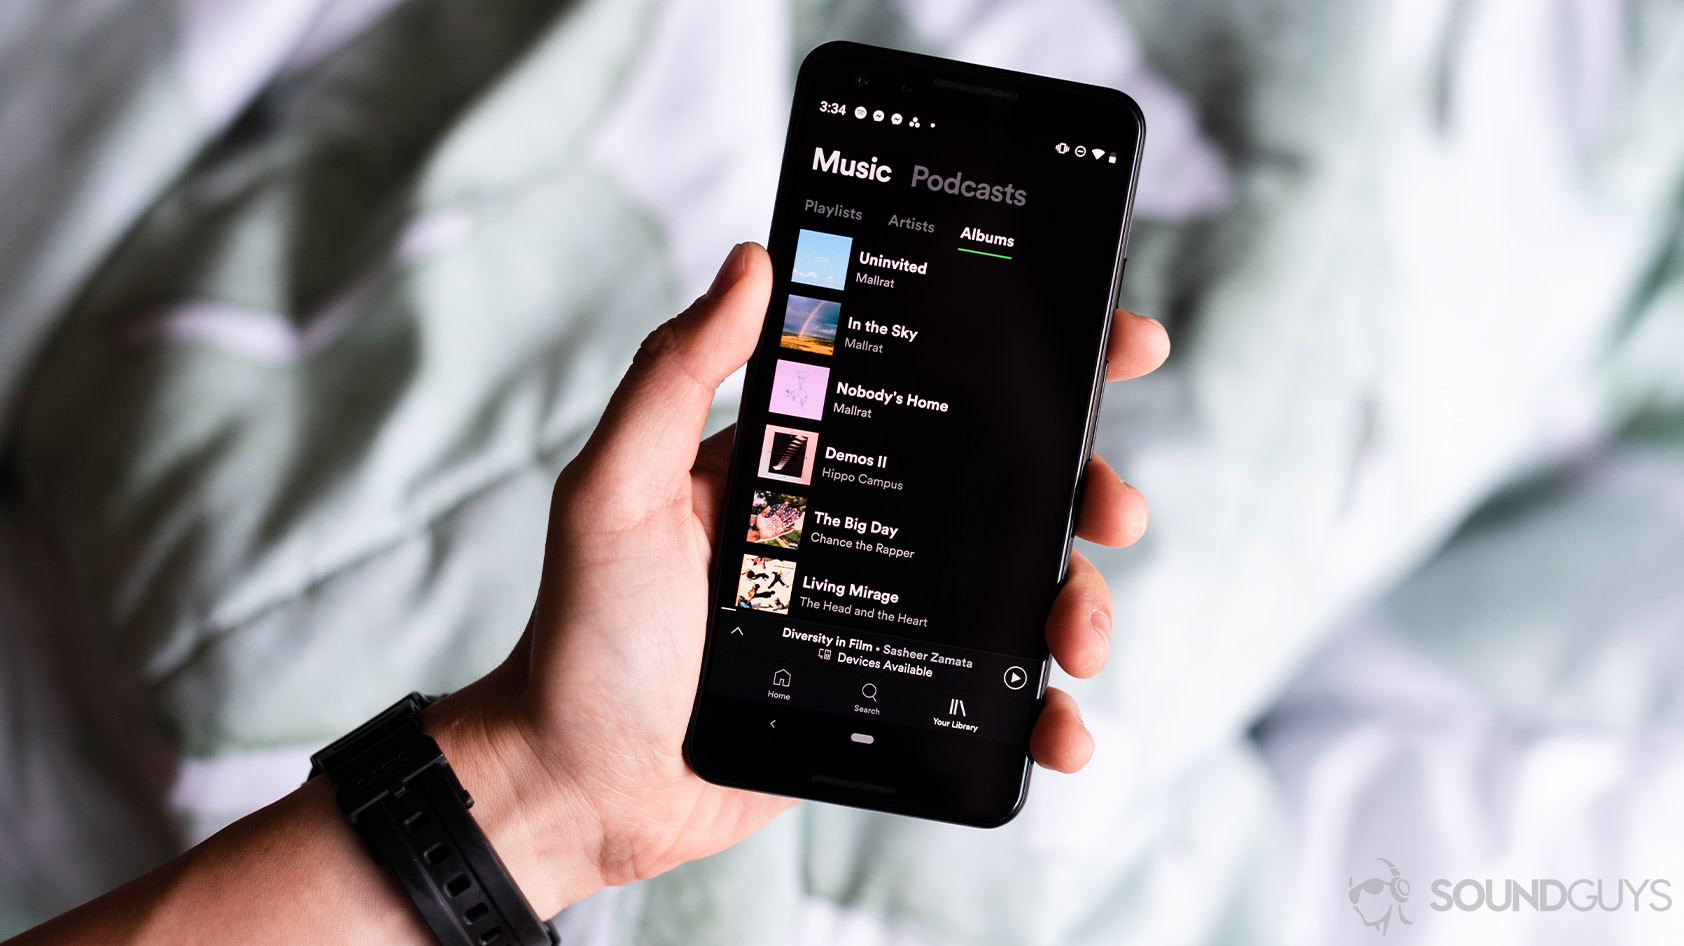 A picture of the Google Pixel 3 held by a hand with the Spotify app open.